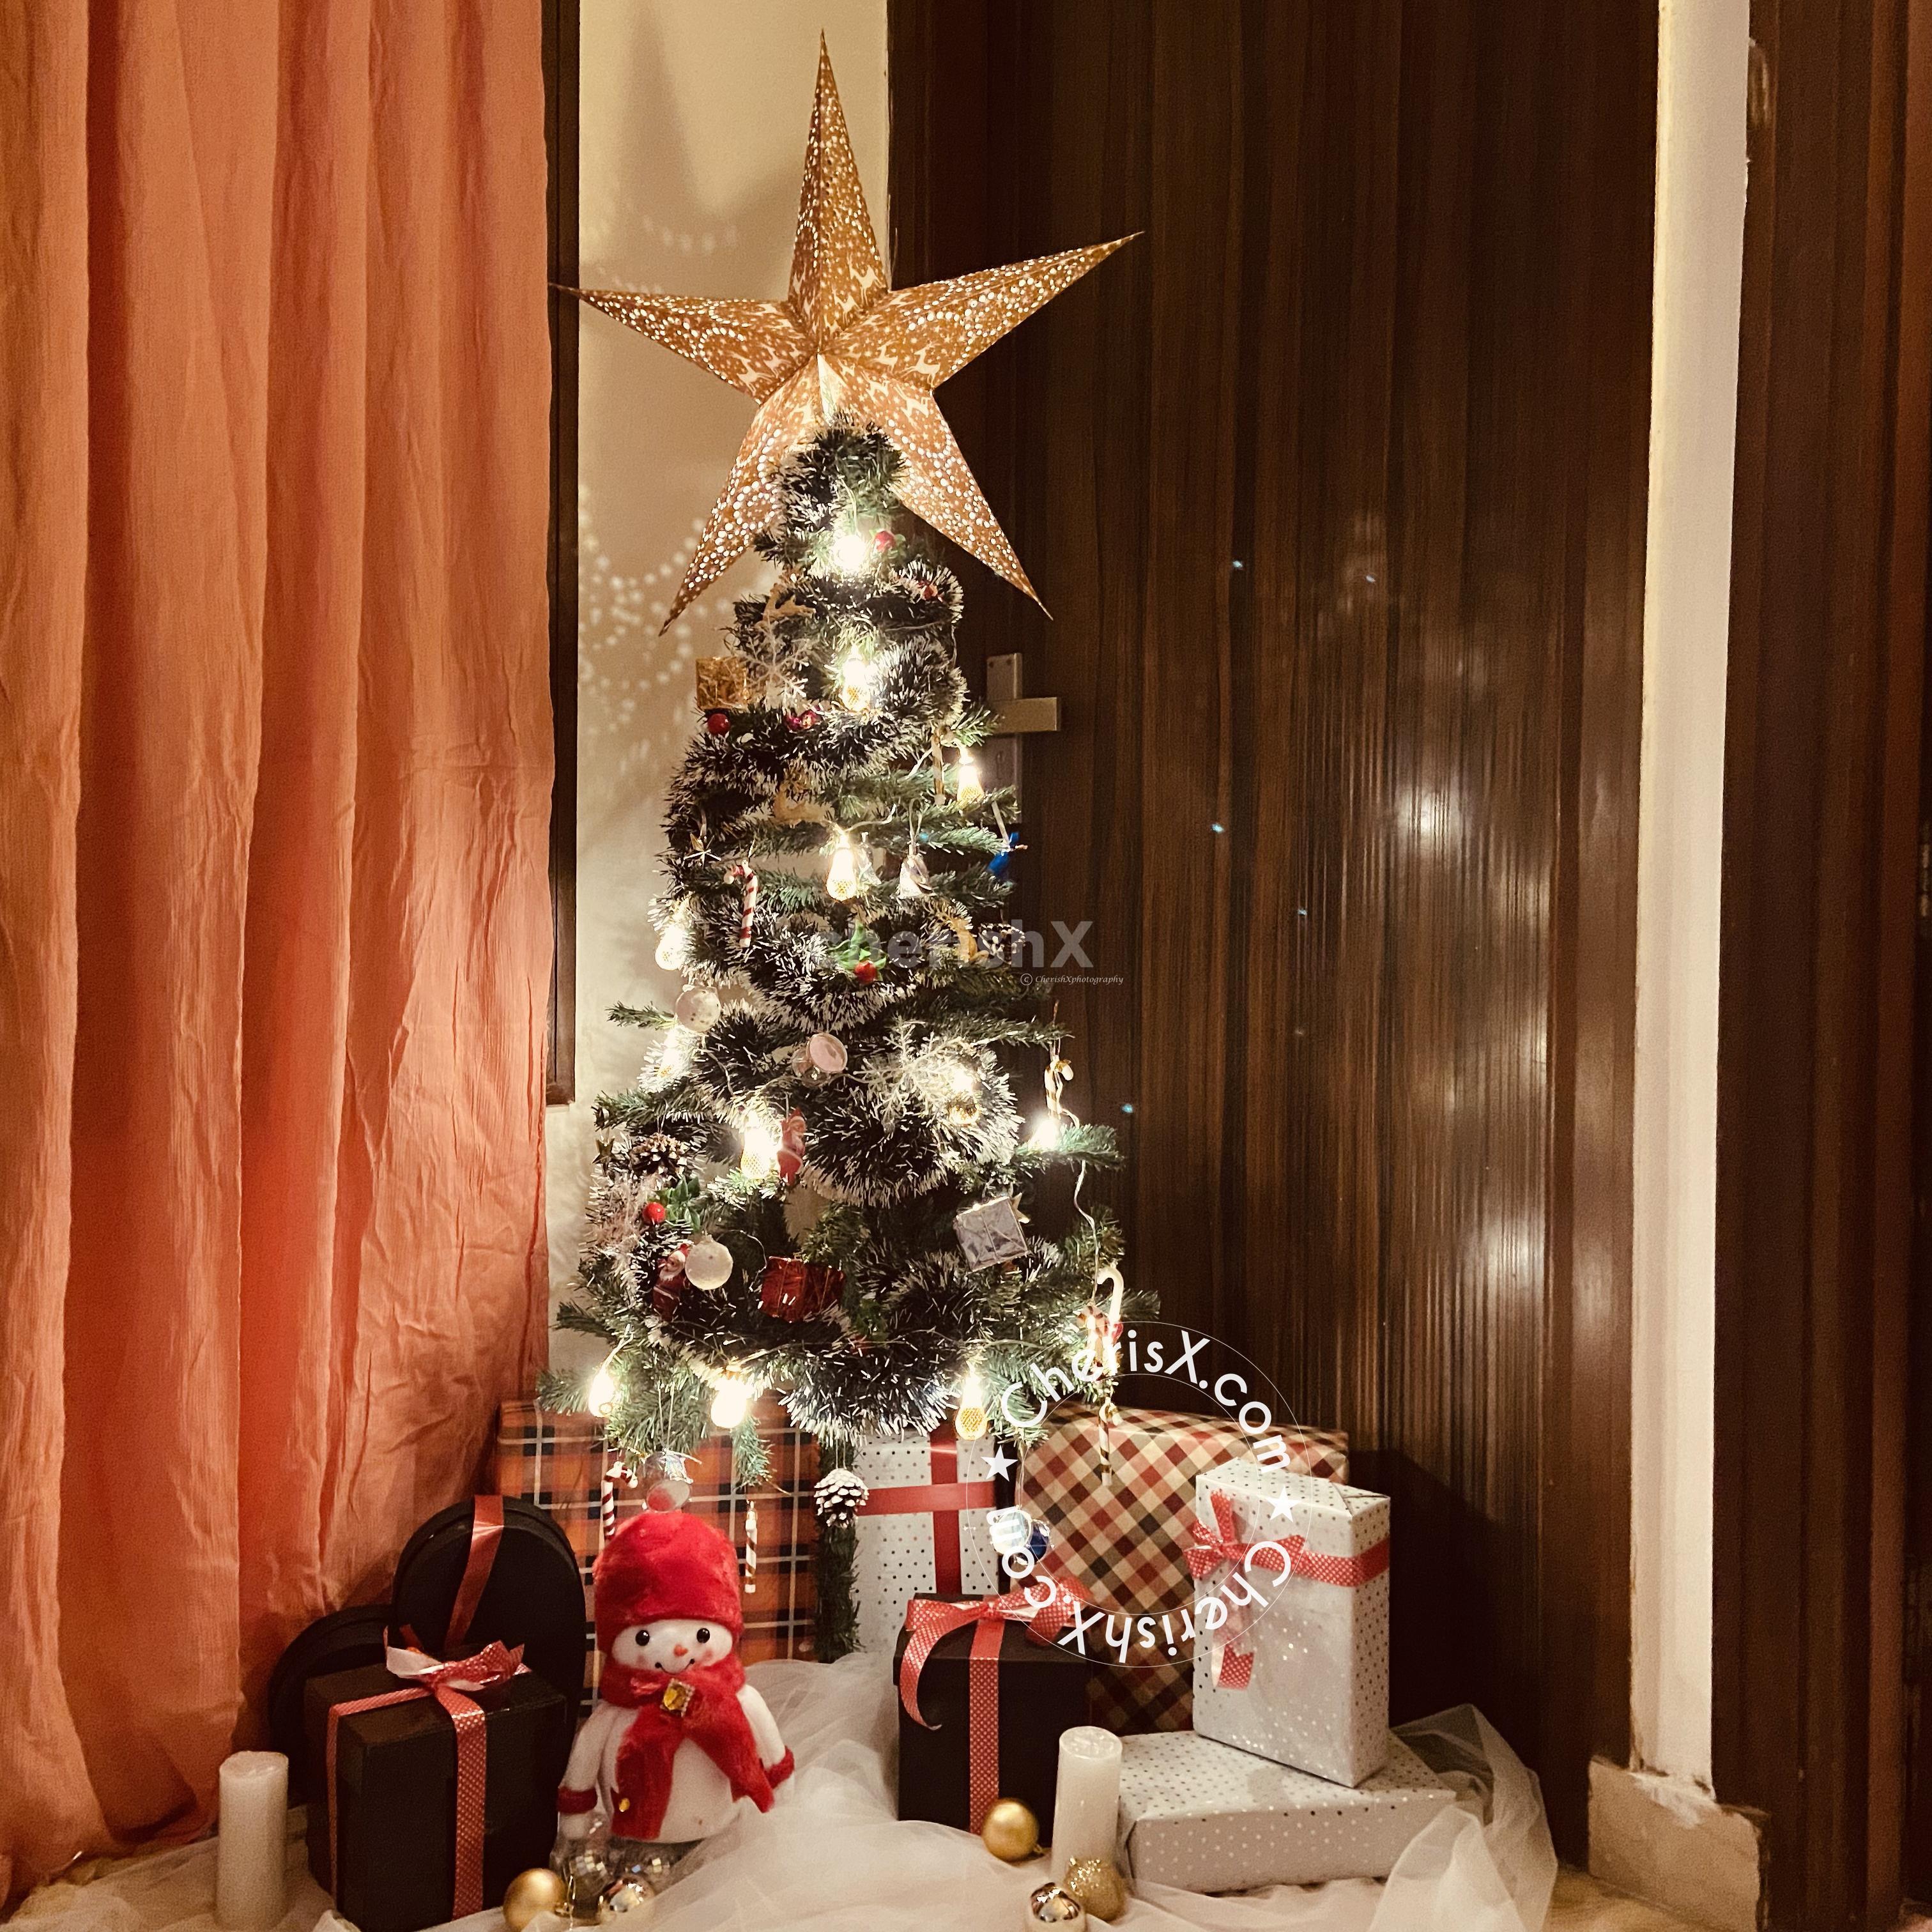 Details more than 77 christmas tree images with decorations latest